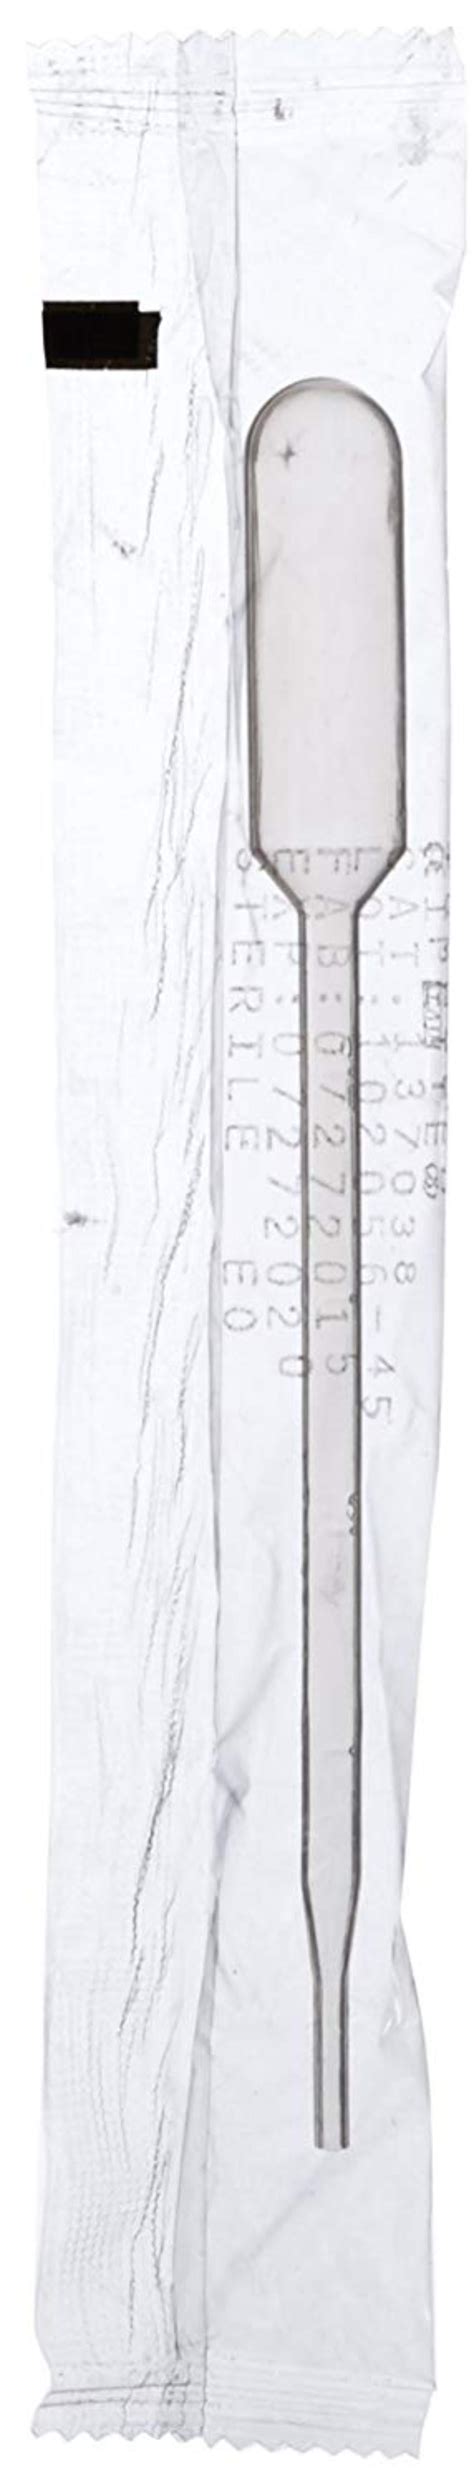 137038 Ldpe Graduated Transfer Pipet Large Bulb Sterile Individually